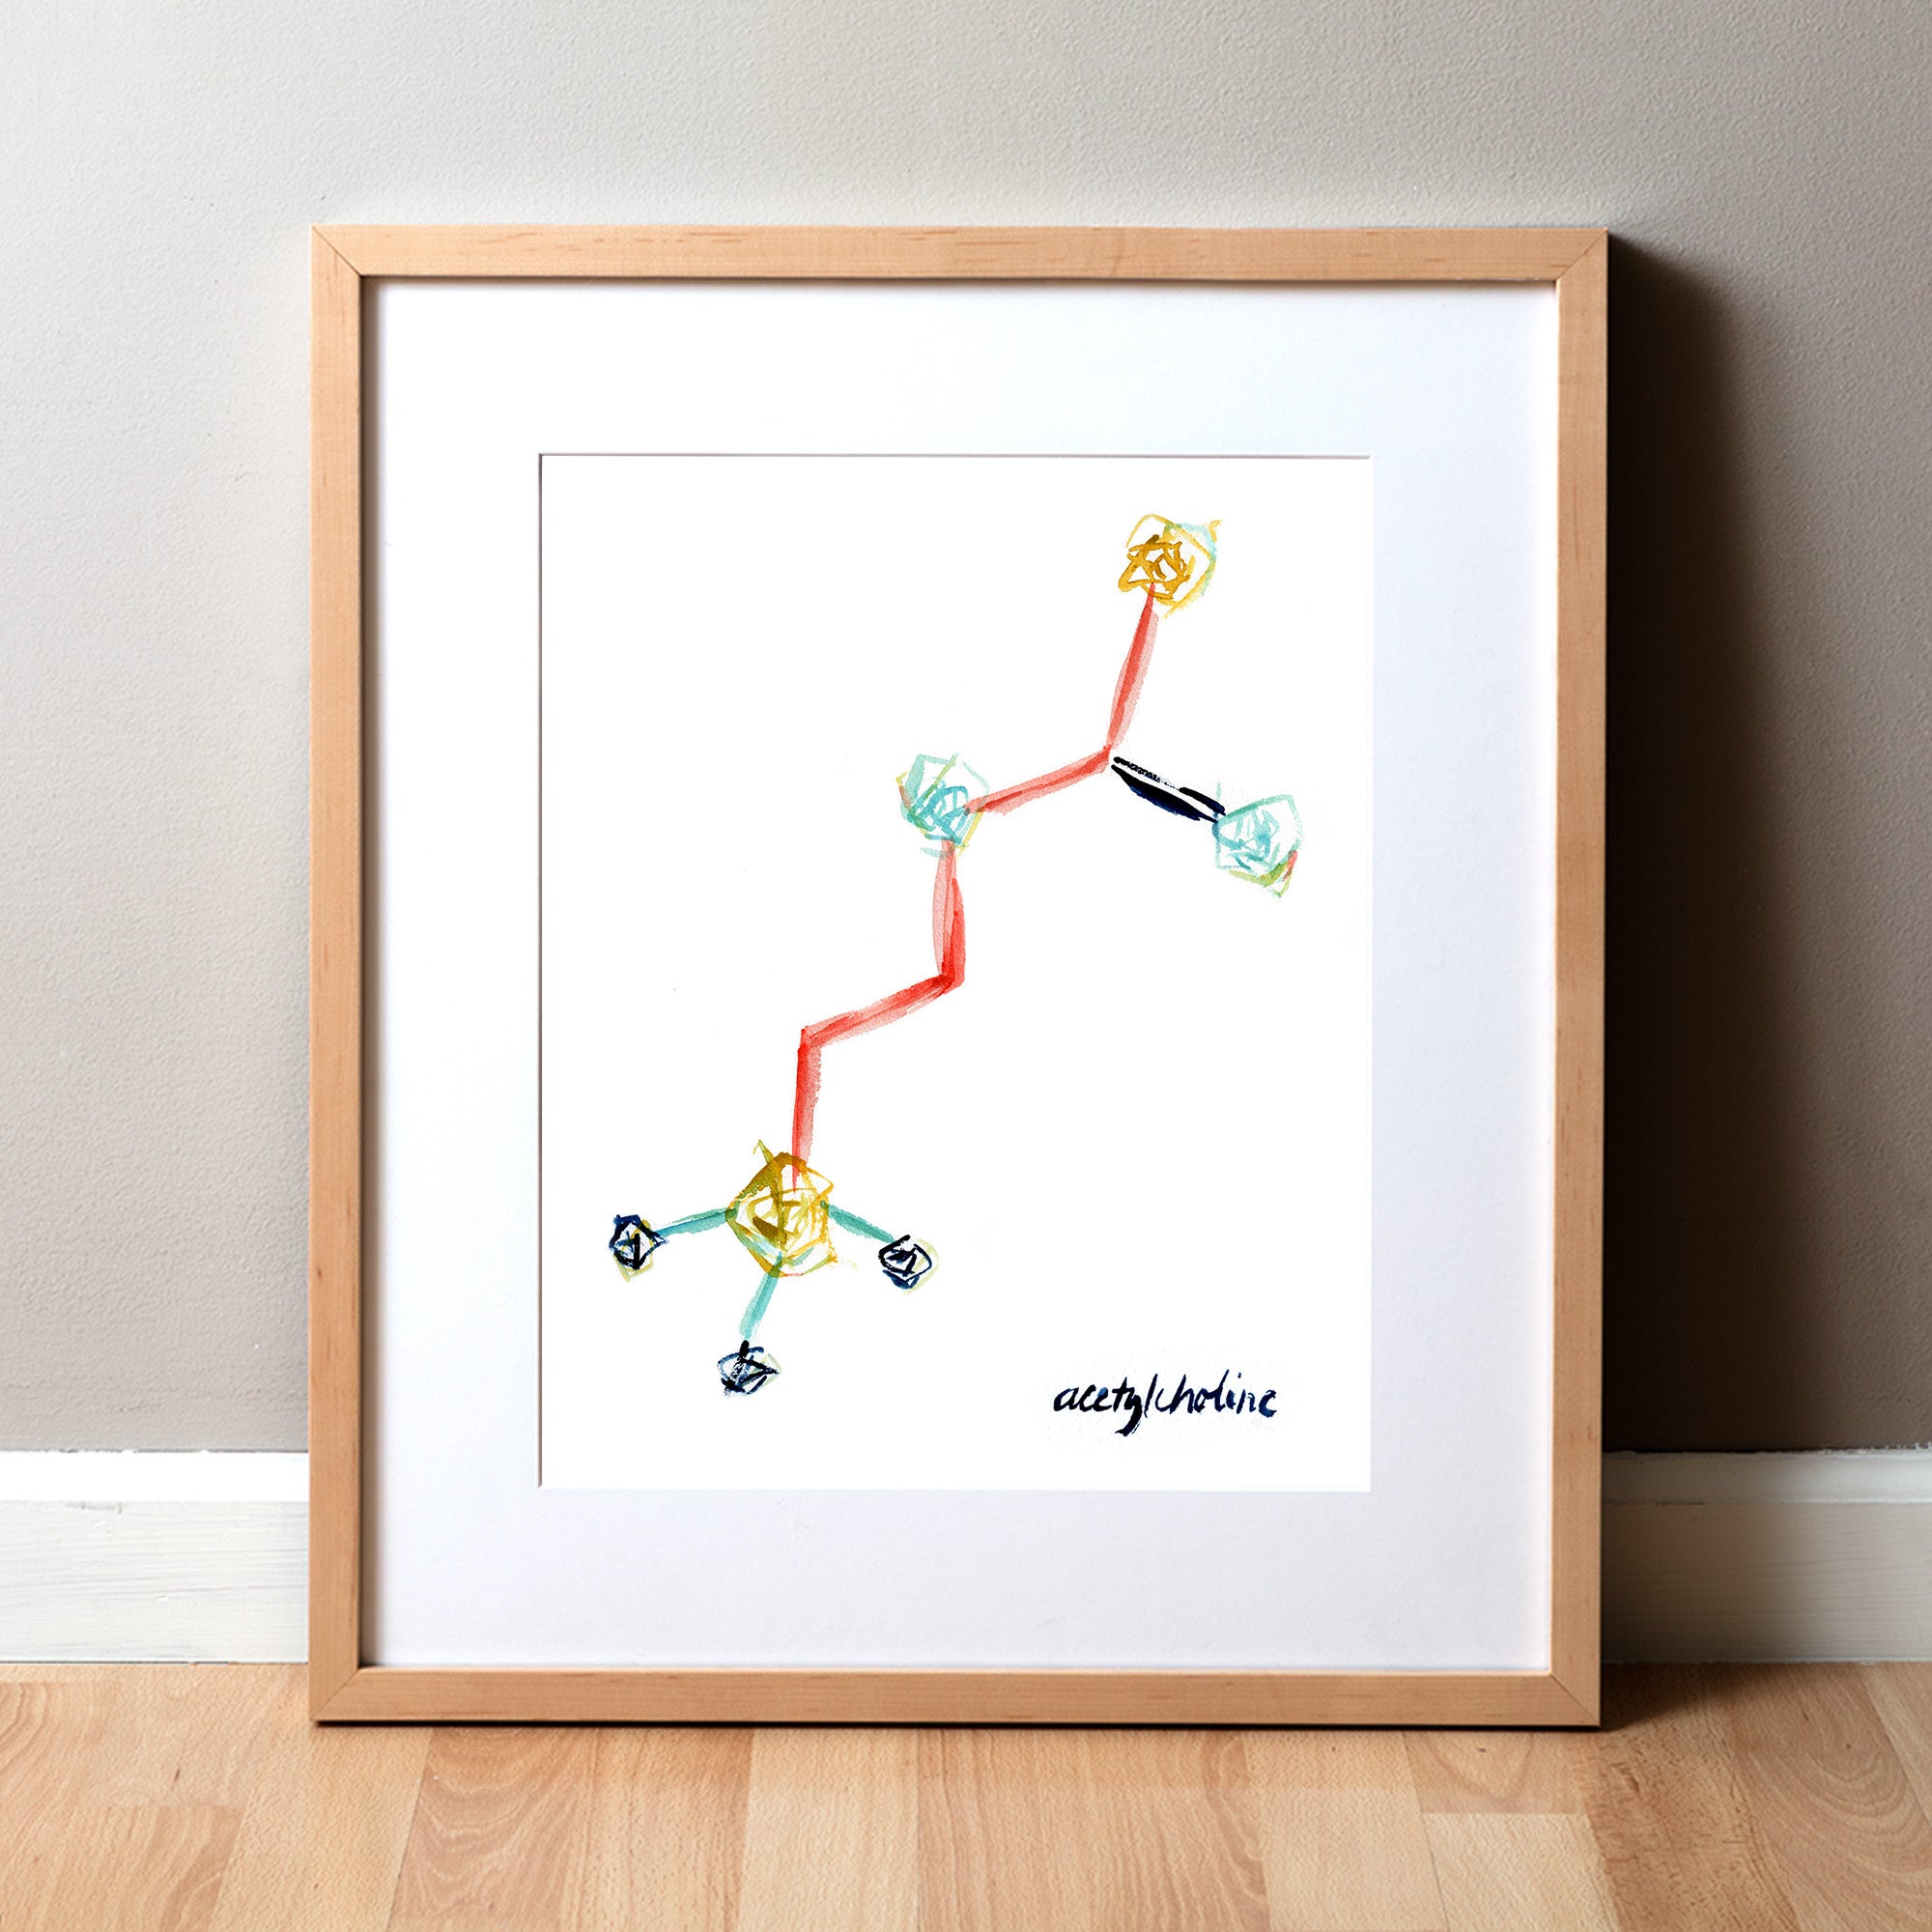 Framed watercolor painting of the acetylcholine structure in blues, yellow and reds.